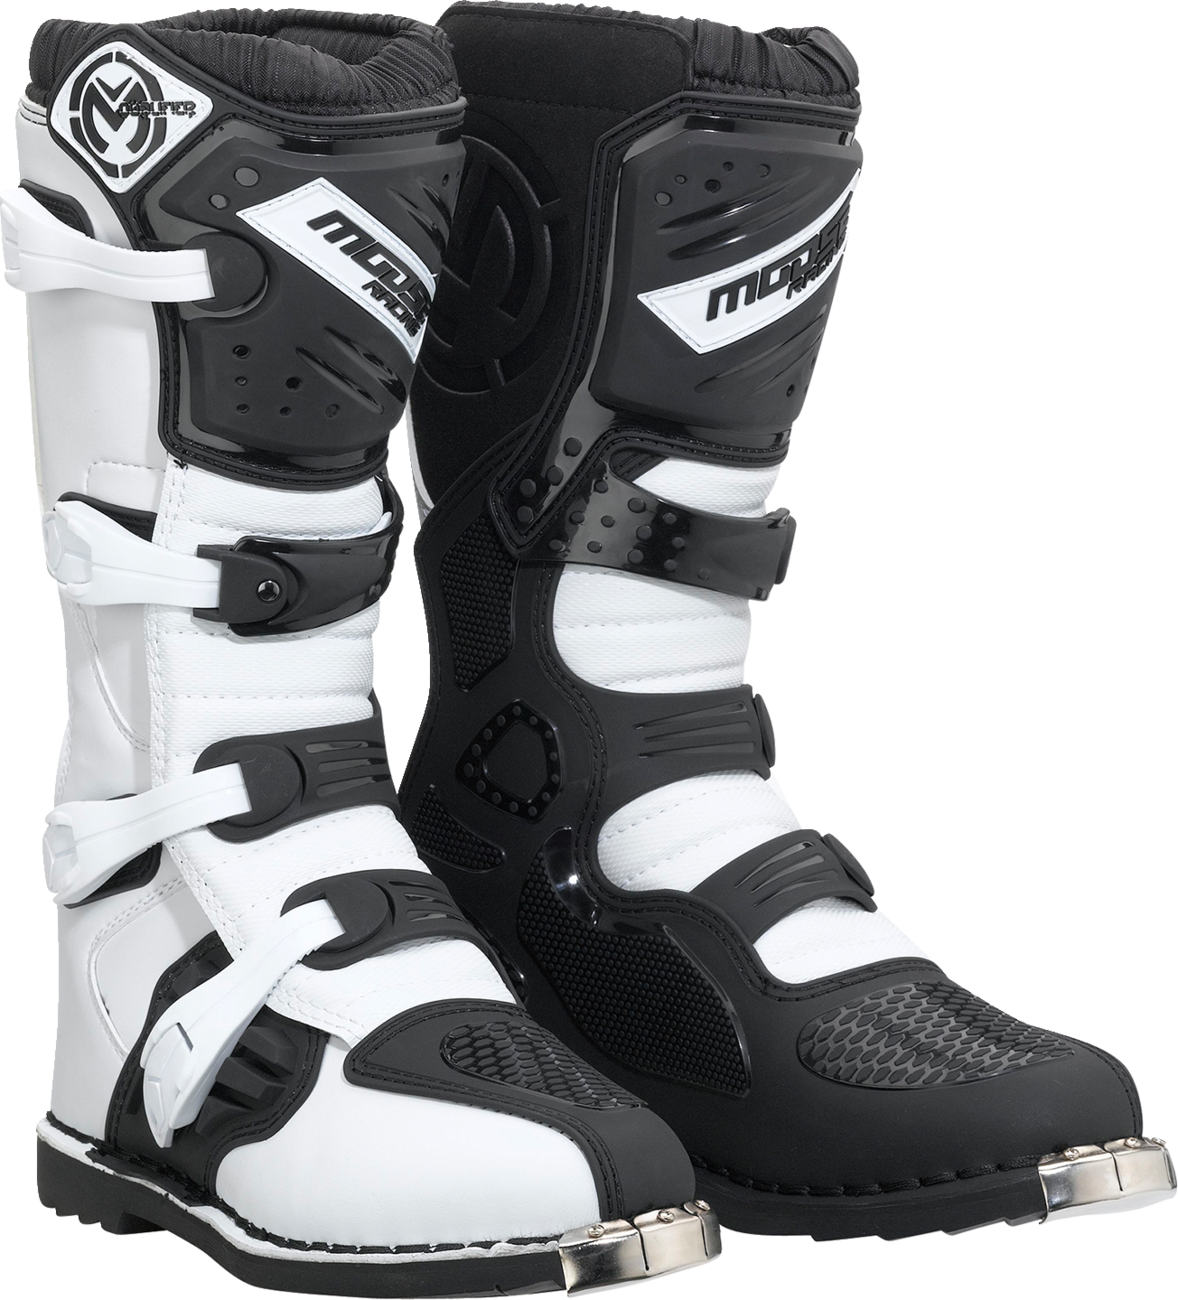 MOOSE RACING Qualifier Boots - Black/White - Size 13 3410-2605